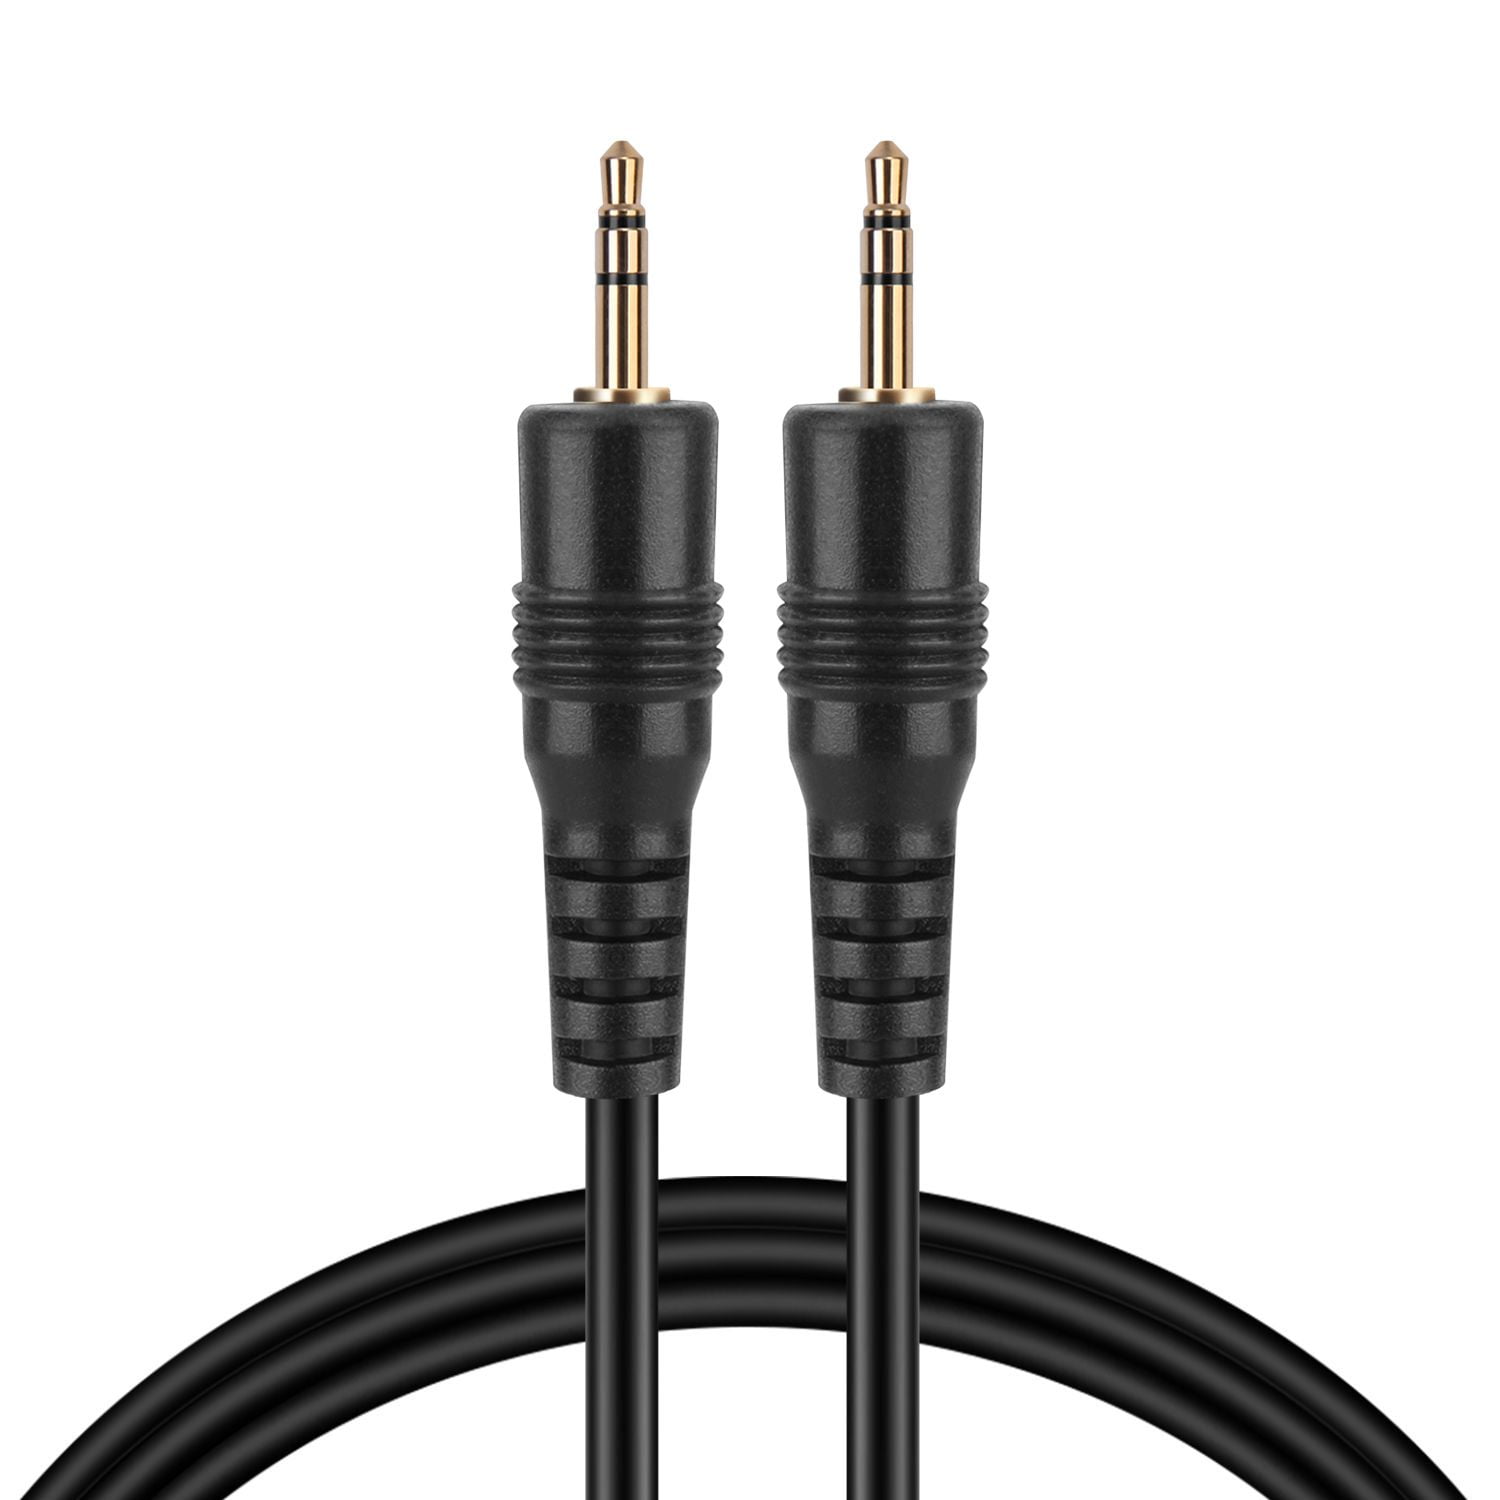 Cable 2.5 Mm Electricidad Cables